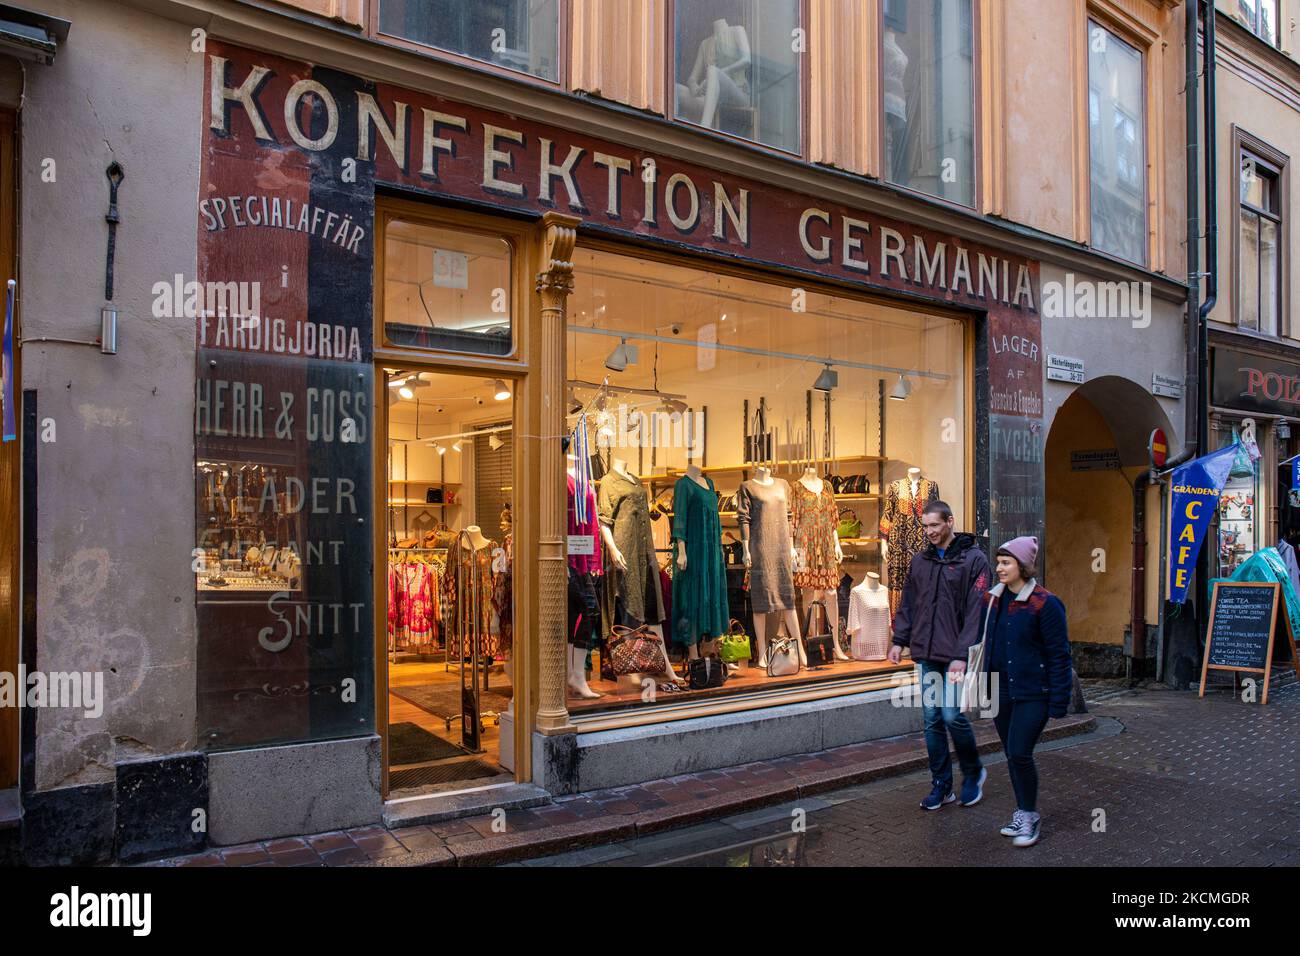 Konfektion Germania clothing store in Gamla Stan or Old Town of Stockholm, Sweden Stock Photo